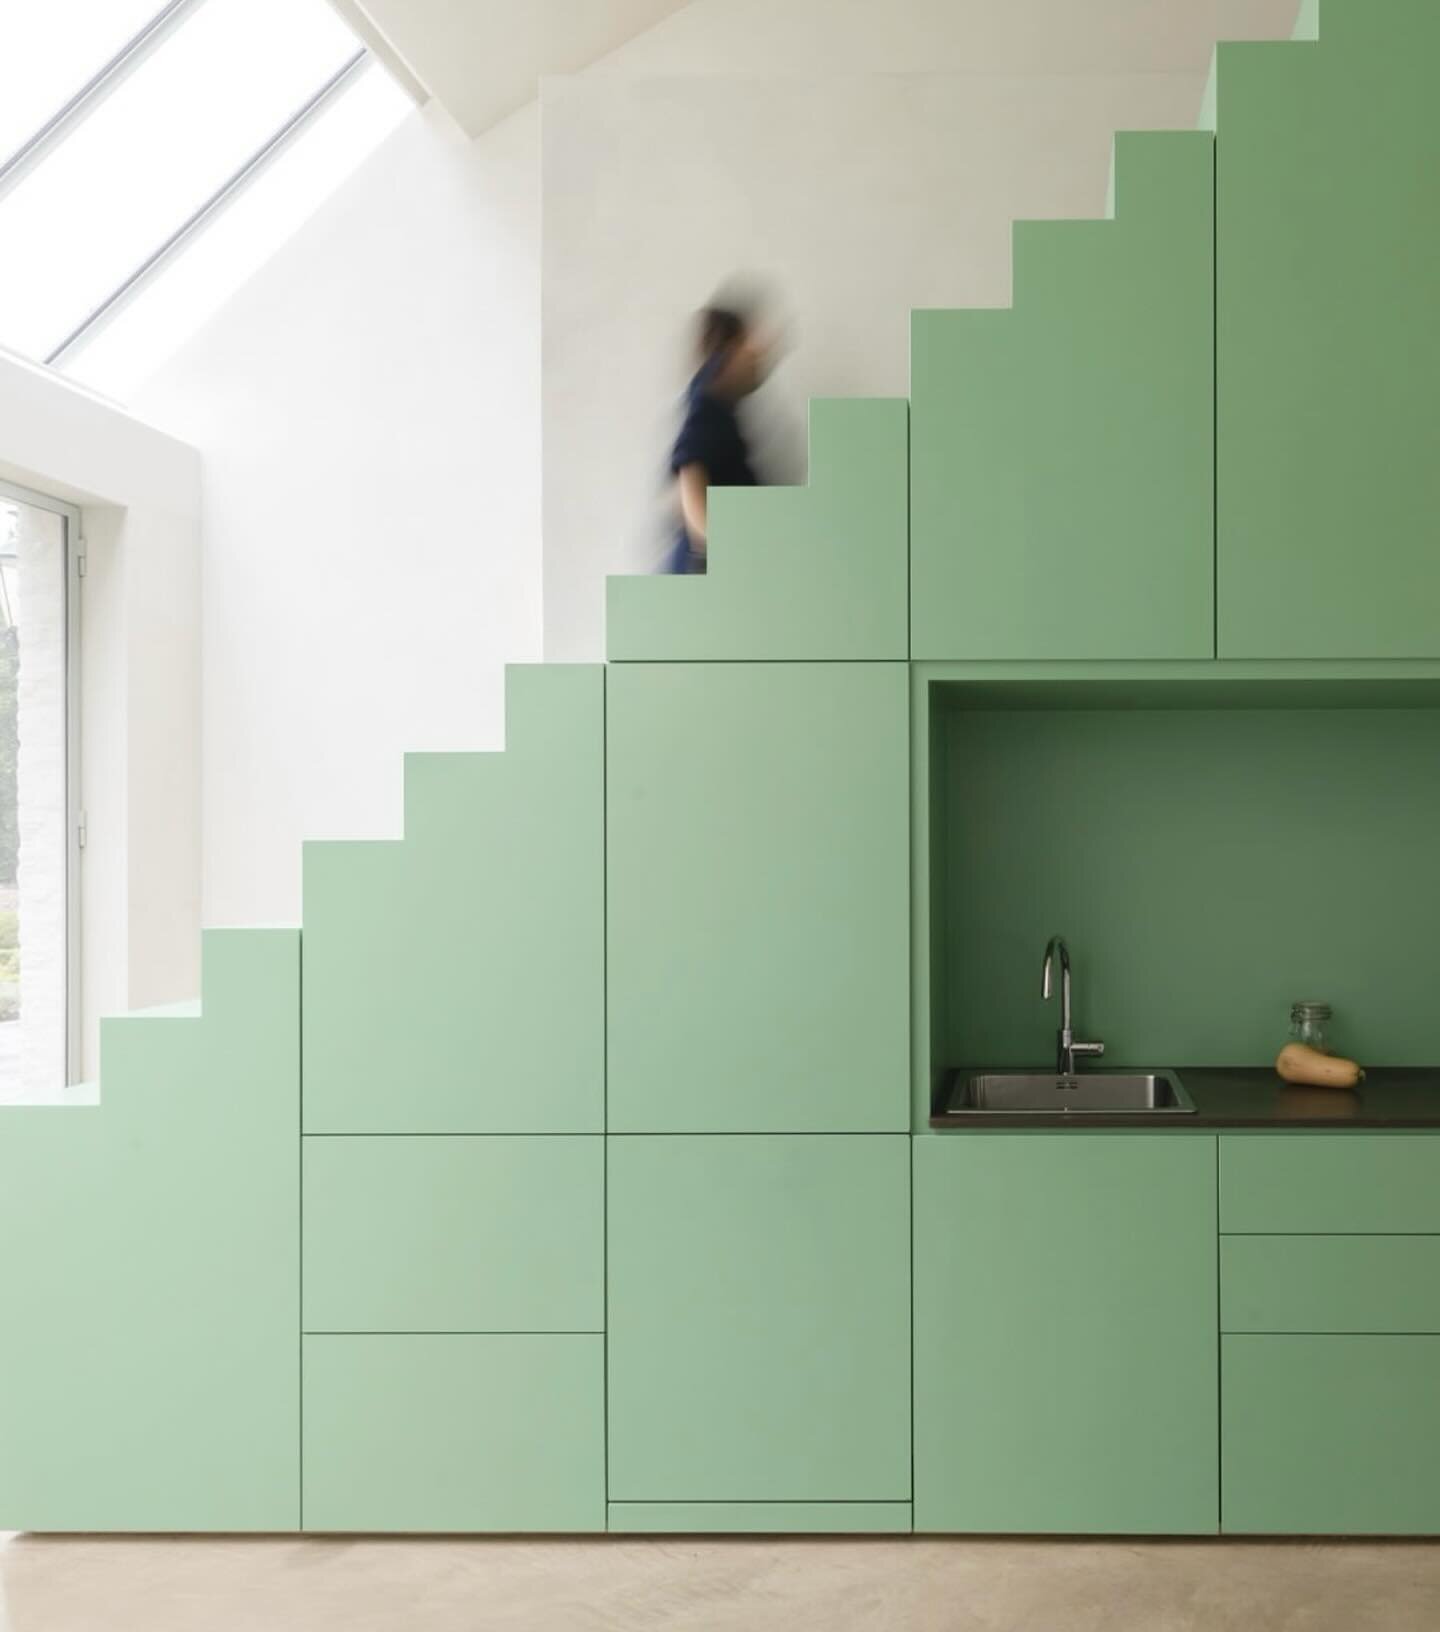 I am feeling very inspired this morning by this staircase!  Such visual interest, functional storage, nice area for displaying items, and the perfect spring color!!!

@livingcorriere 
..
.
#interiordesign #interiorarchitecture #architectureanddesign 